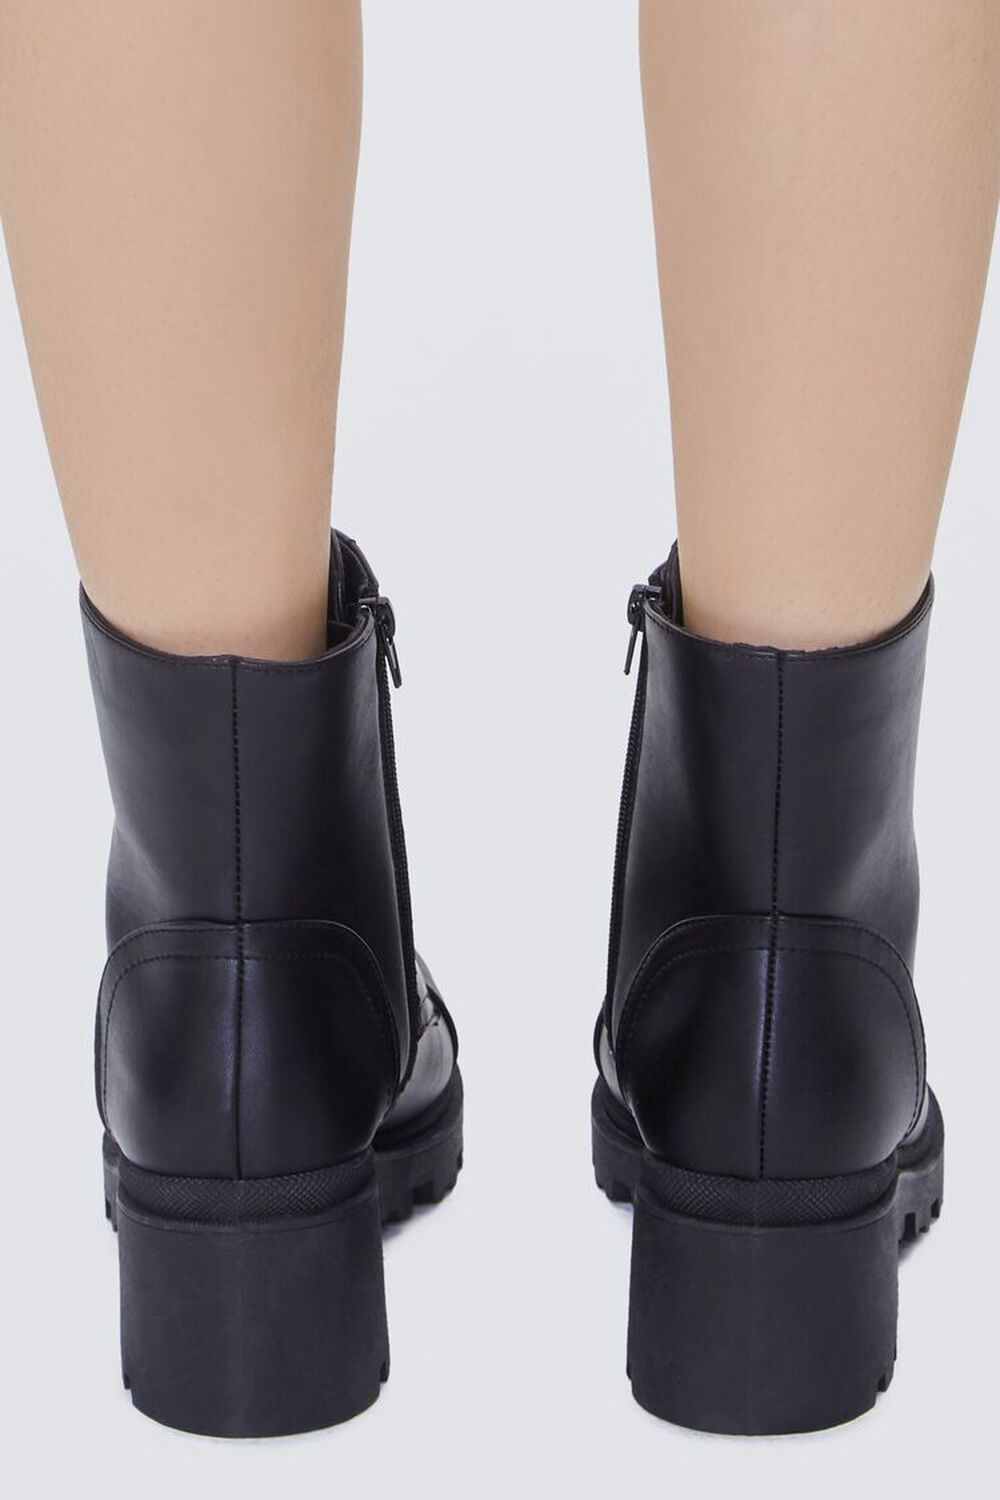 BLACK Faux Leather Combat Booties, image 3